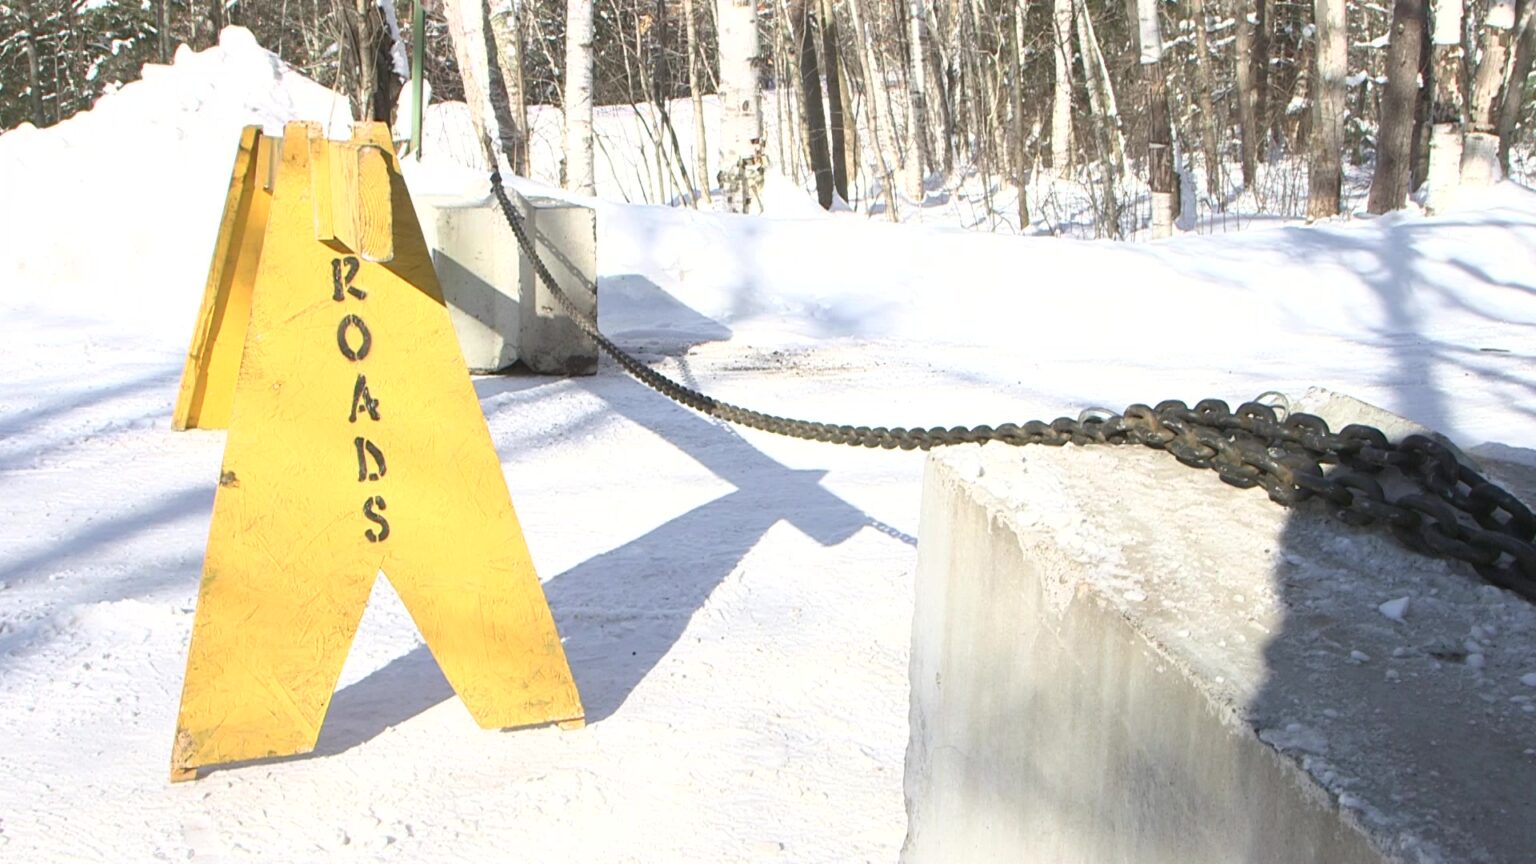 A wood road barrier with Roads painted on its side and two concrete blocks connected with a metal chain sit in front of a road covered in snow, with trees in the background.